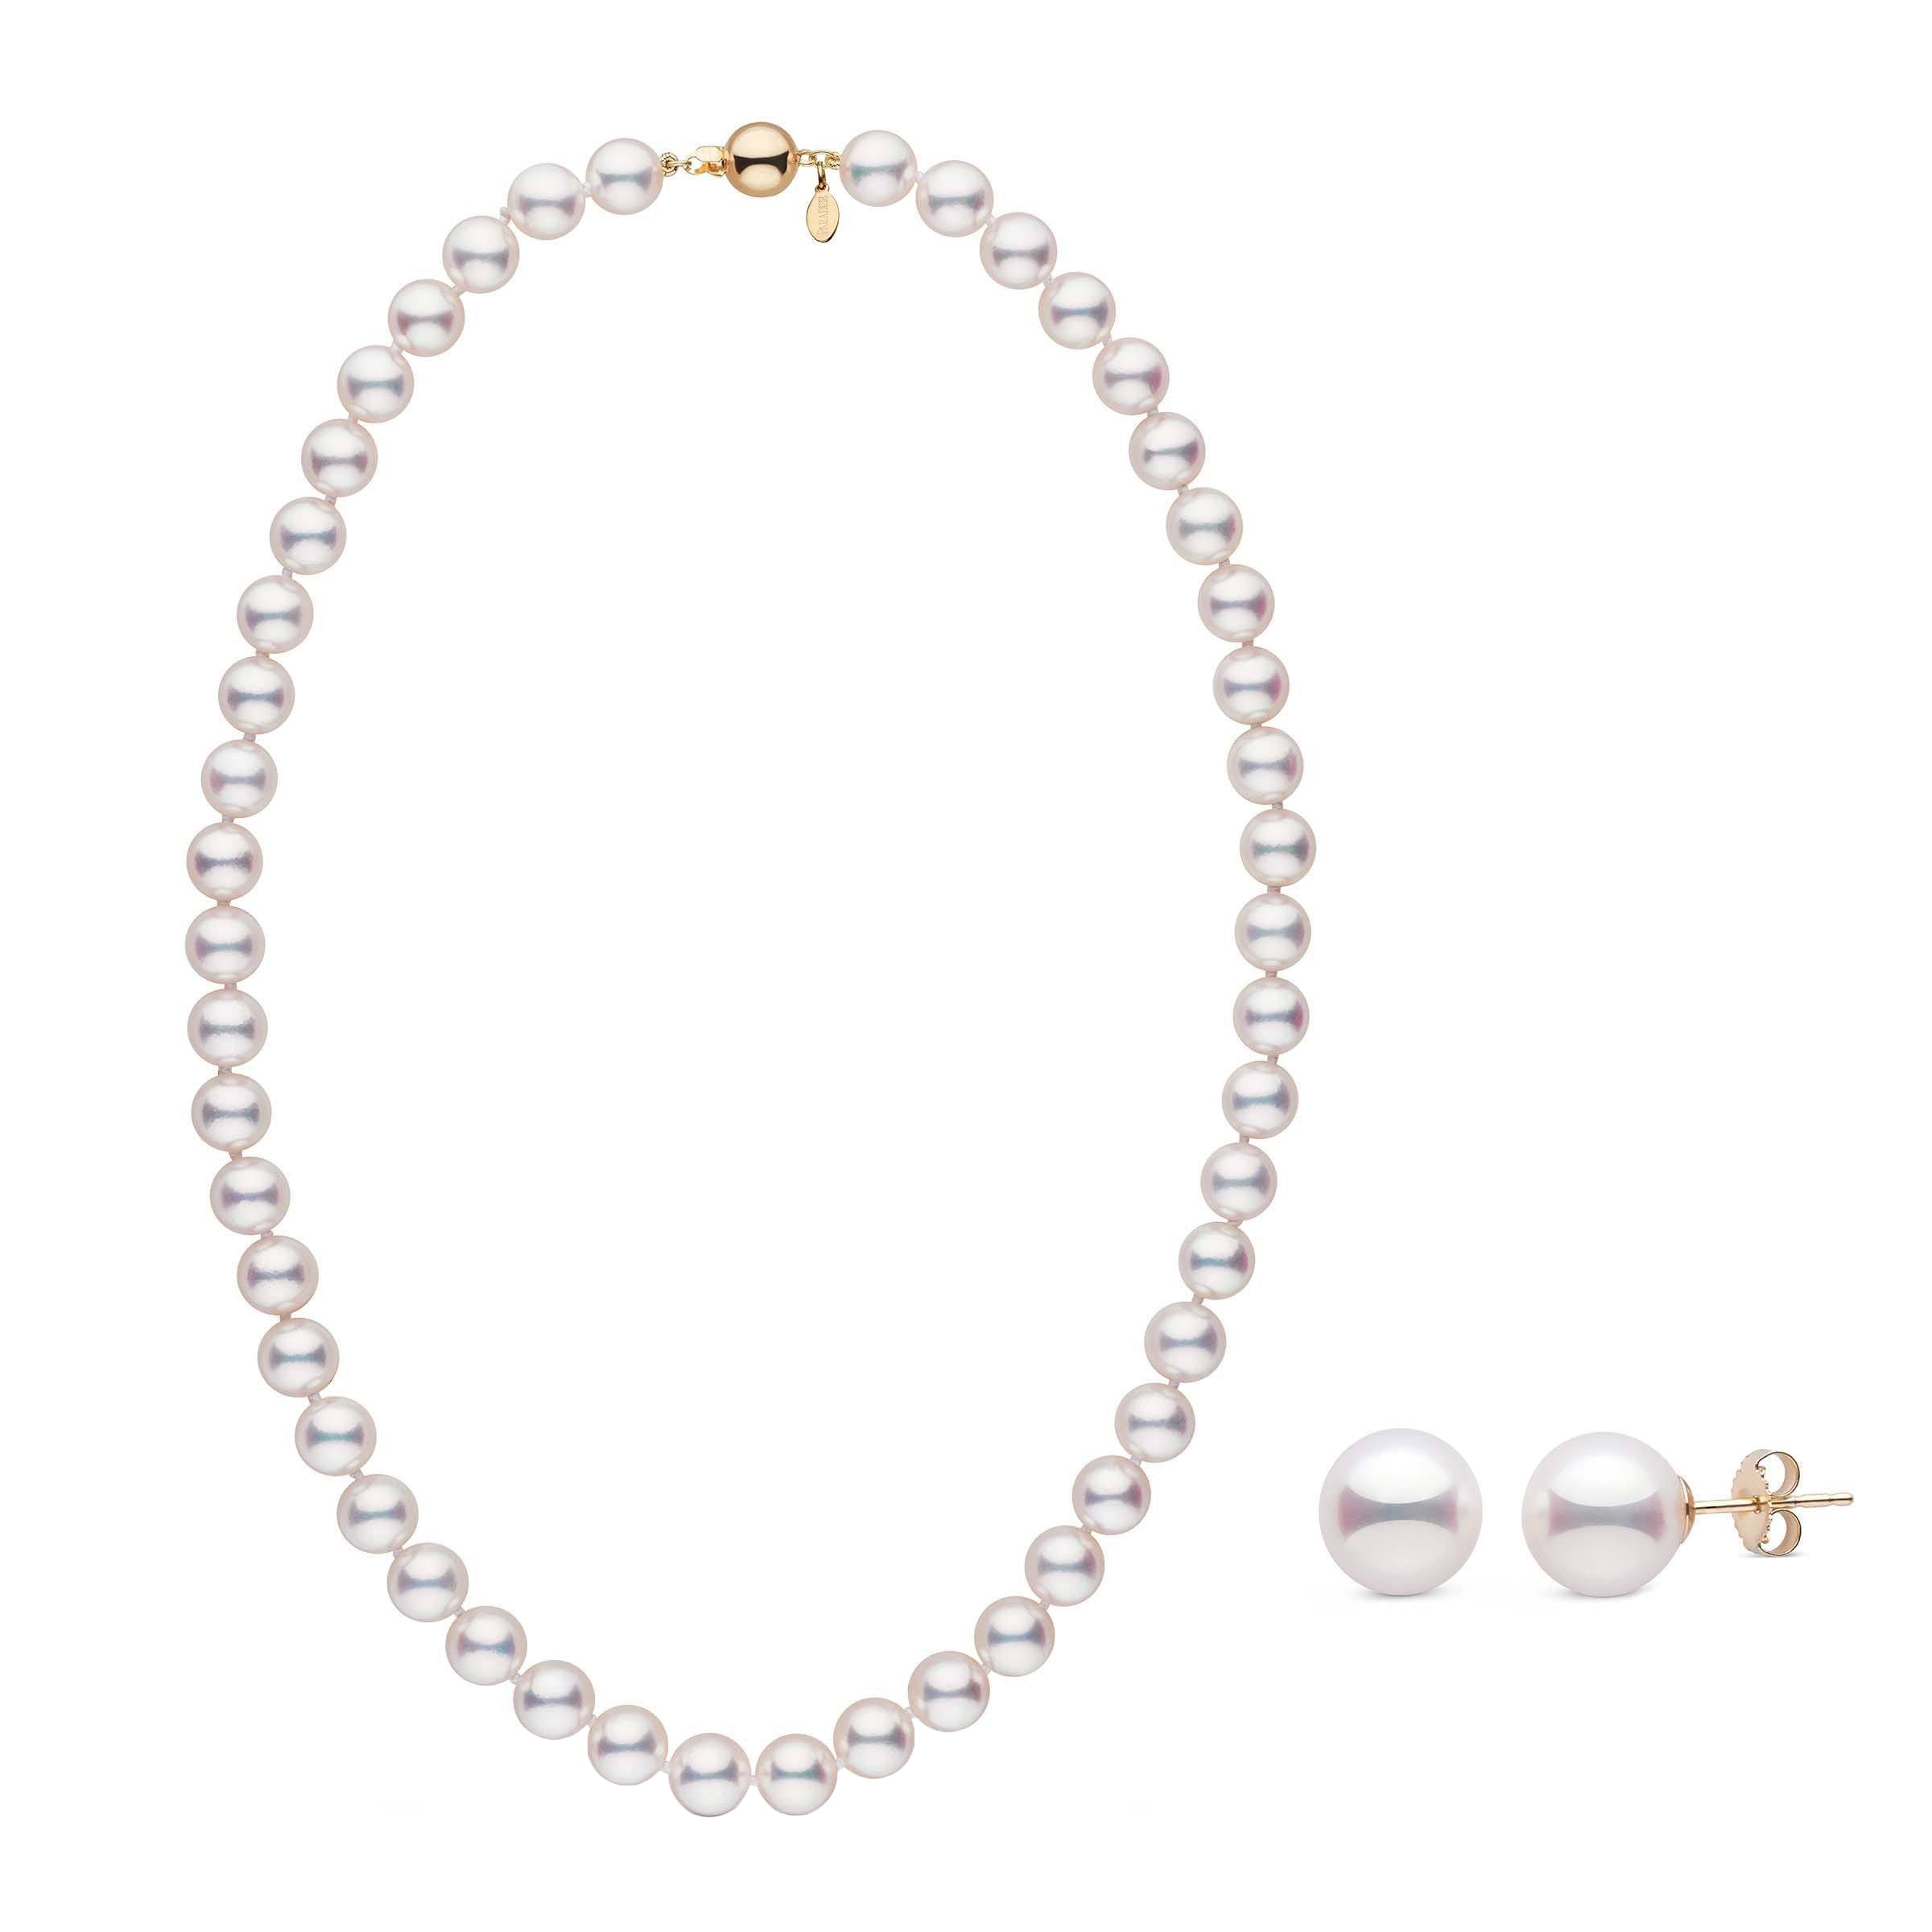 Certified 9.0-9.5 mm White Hanadama Akoya Pearl Set Necklace and Earrings in yellow gold